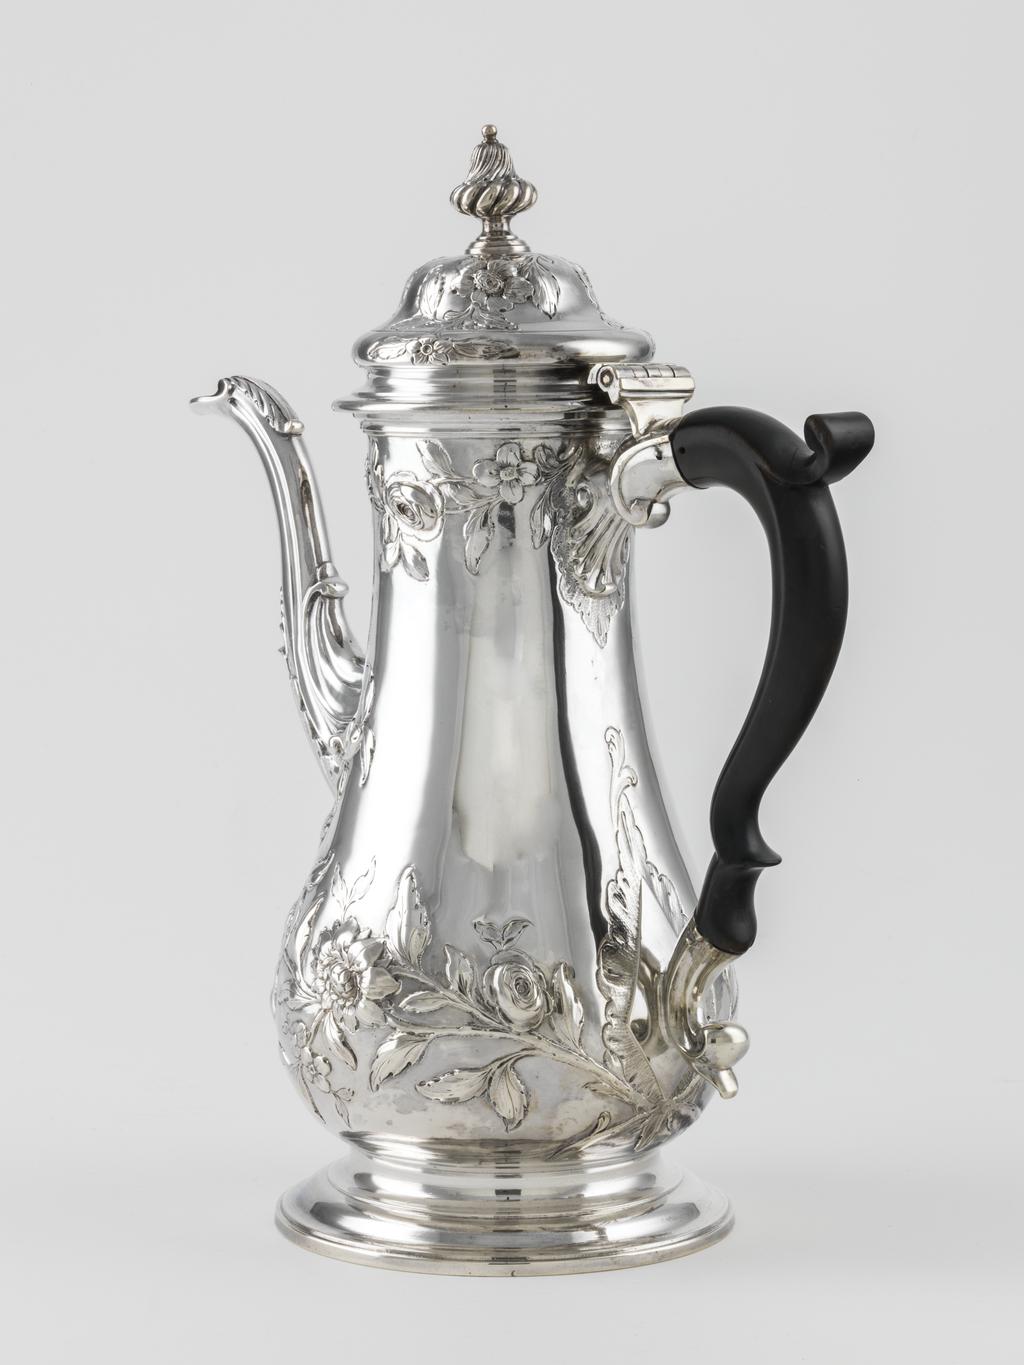 An image of Coffee Pot. Swift, John (British). The tall pear-shaped body is embossed with sprays of leaves and flowers. The top of the swan's neck spout is leaf capped, the lower part embossed with flutes and a stylised shell. The body stands on a spreading circular foot. The domed cover is embossed with sprays of flowers and has a wythern silver knop. The double scroll handle is of wood. Silver, embossed and chased, height, to knop, 28.8 cm, width, spout to handle, 23.5 cm, weight, gross, 1020 g, circa 1763-1764. Production Place: London, England.  Rococo.